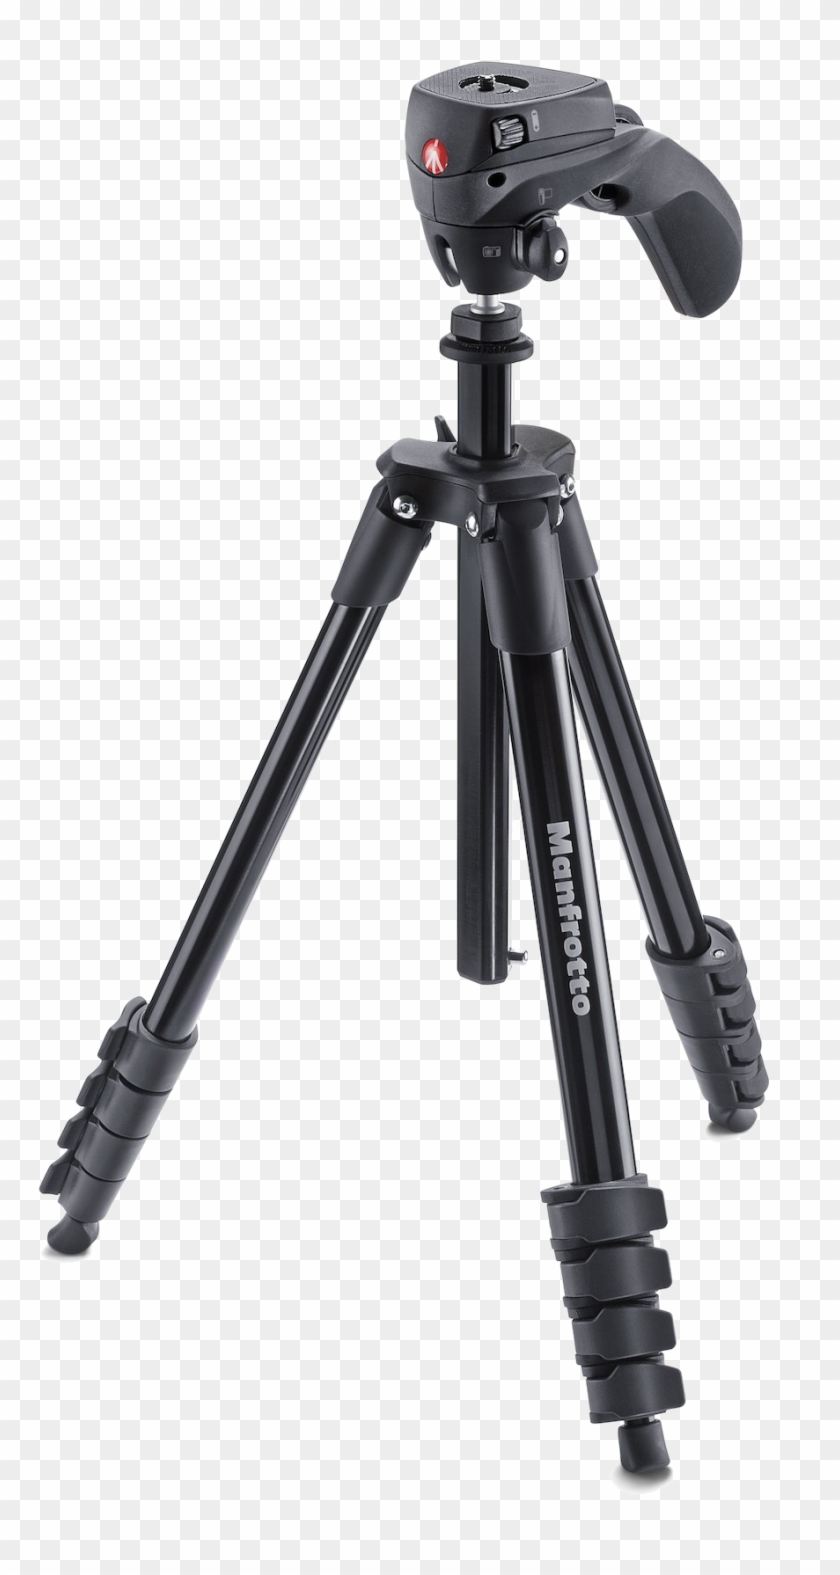 Manfrotto Compact Action Tripod - Trépied Manfrotto Compact Action Clipart #1071791